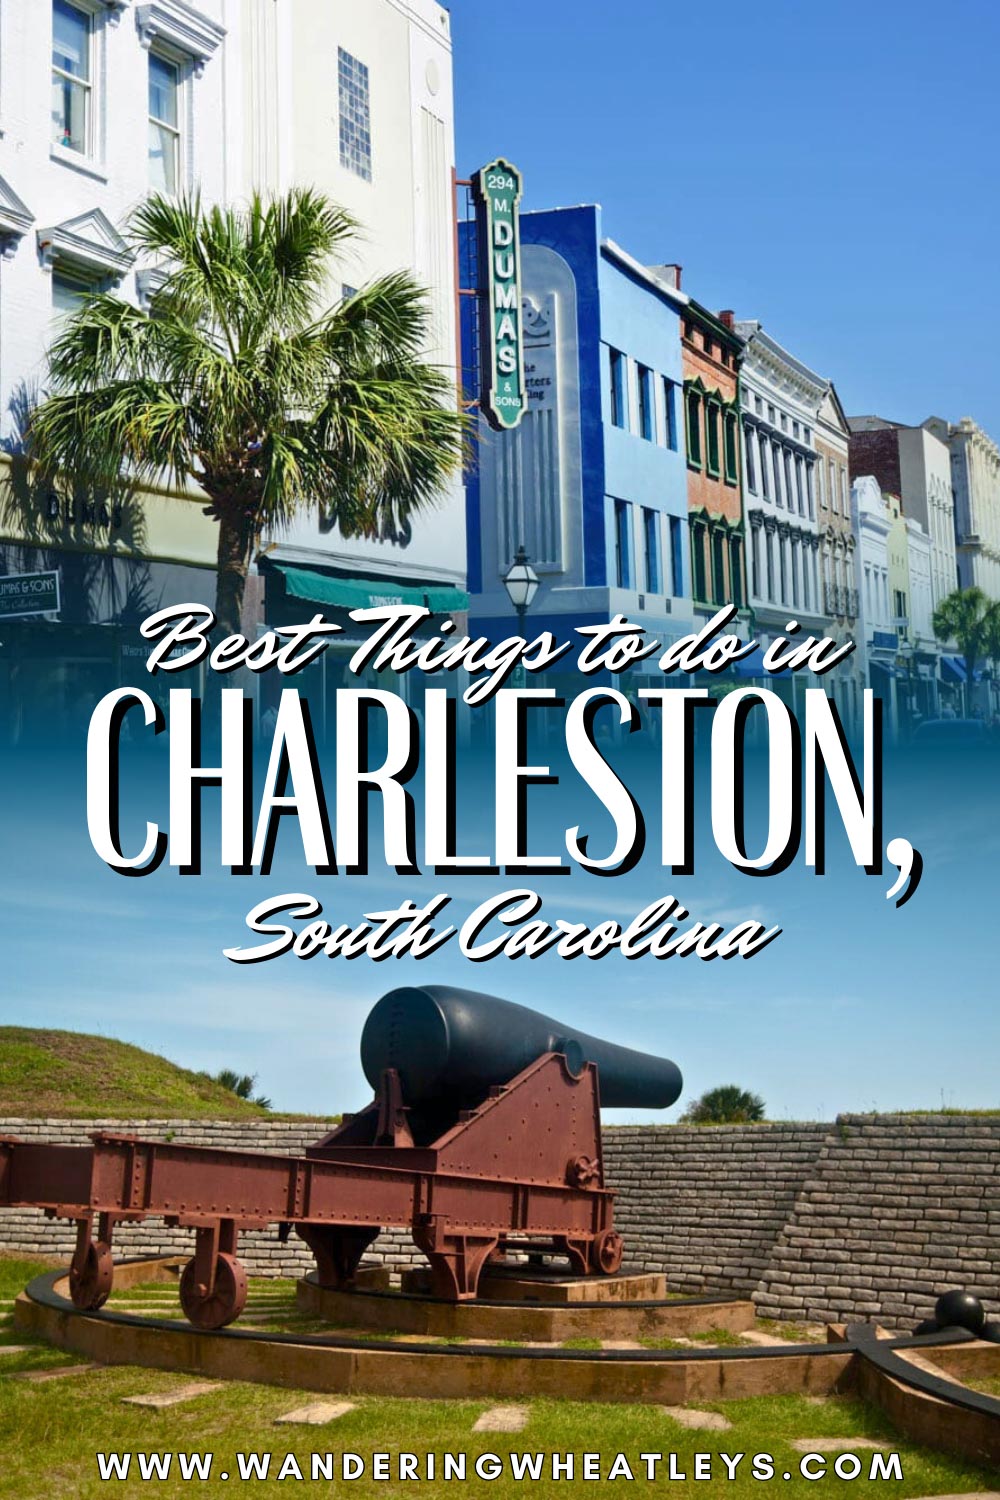 28 Best Things to Do in Charleston, South Carolina